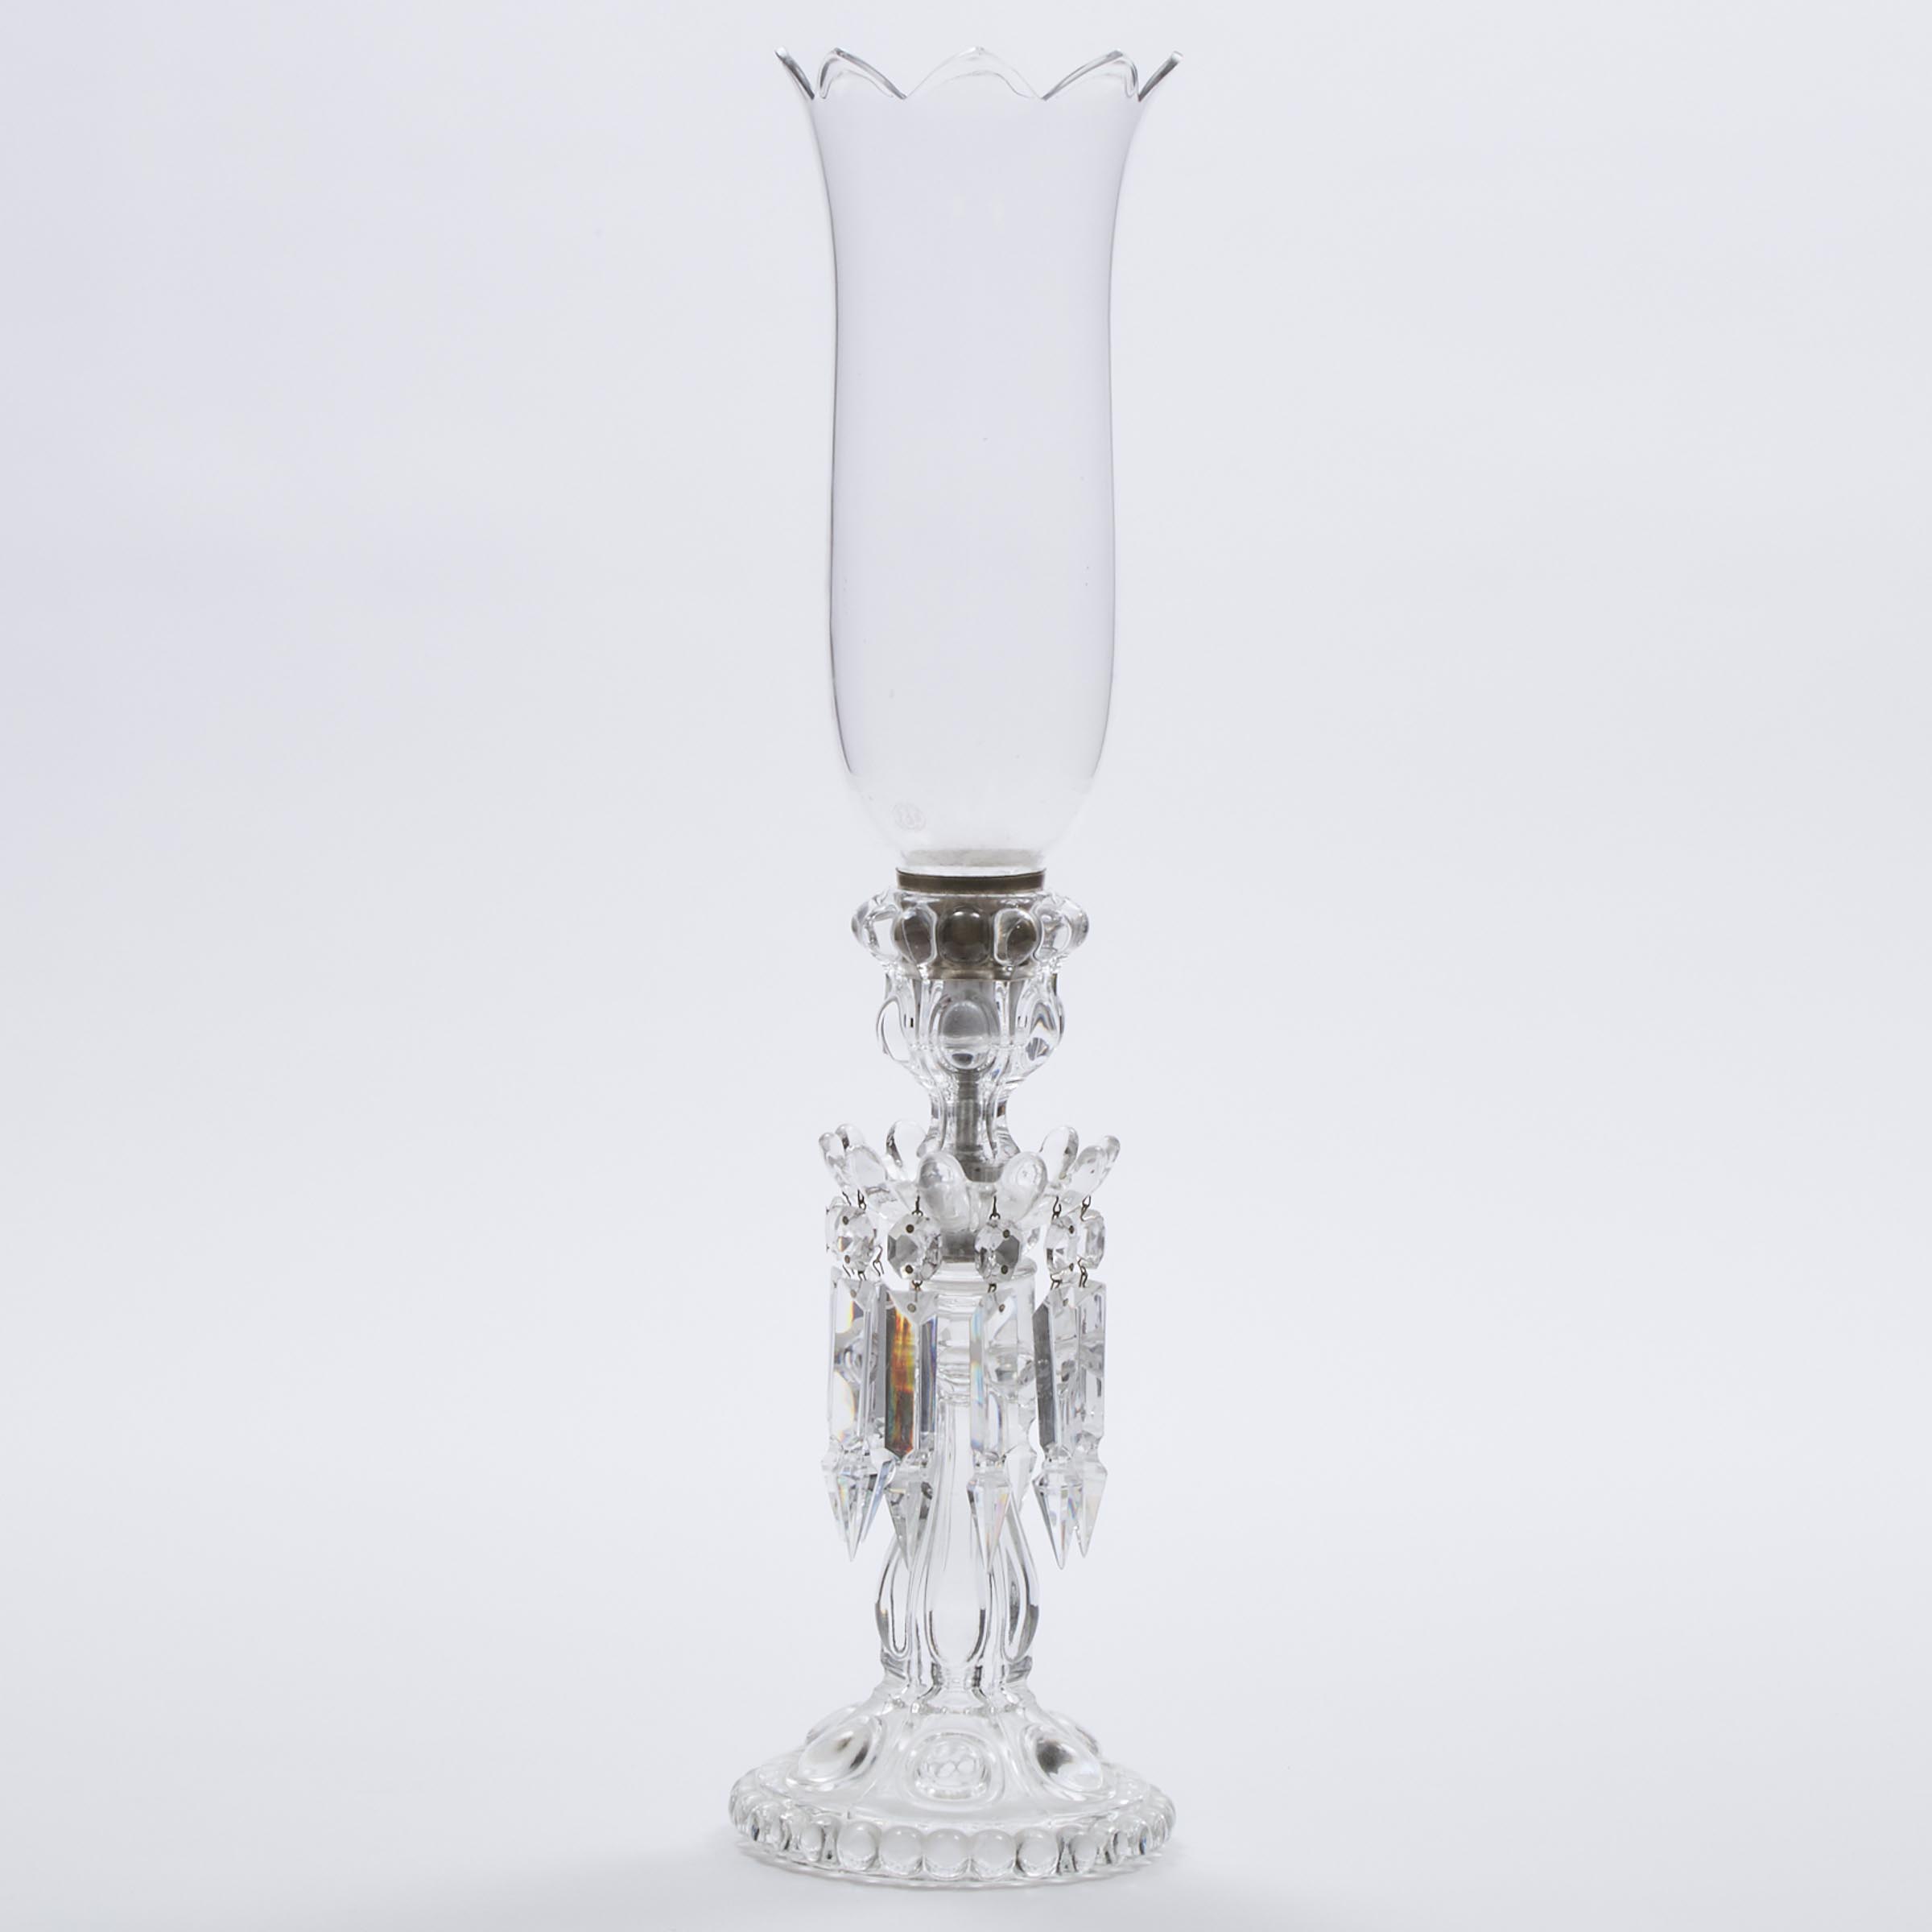 Baccarat Moulded and Cut Glass 3aba9f